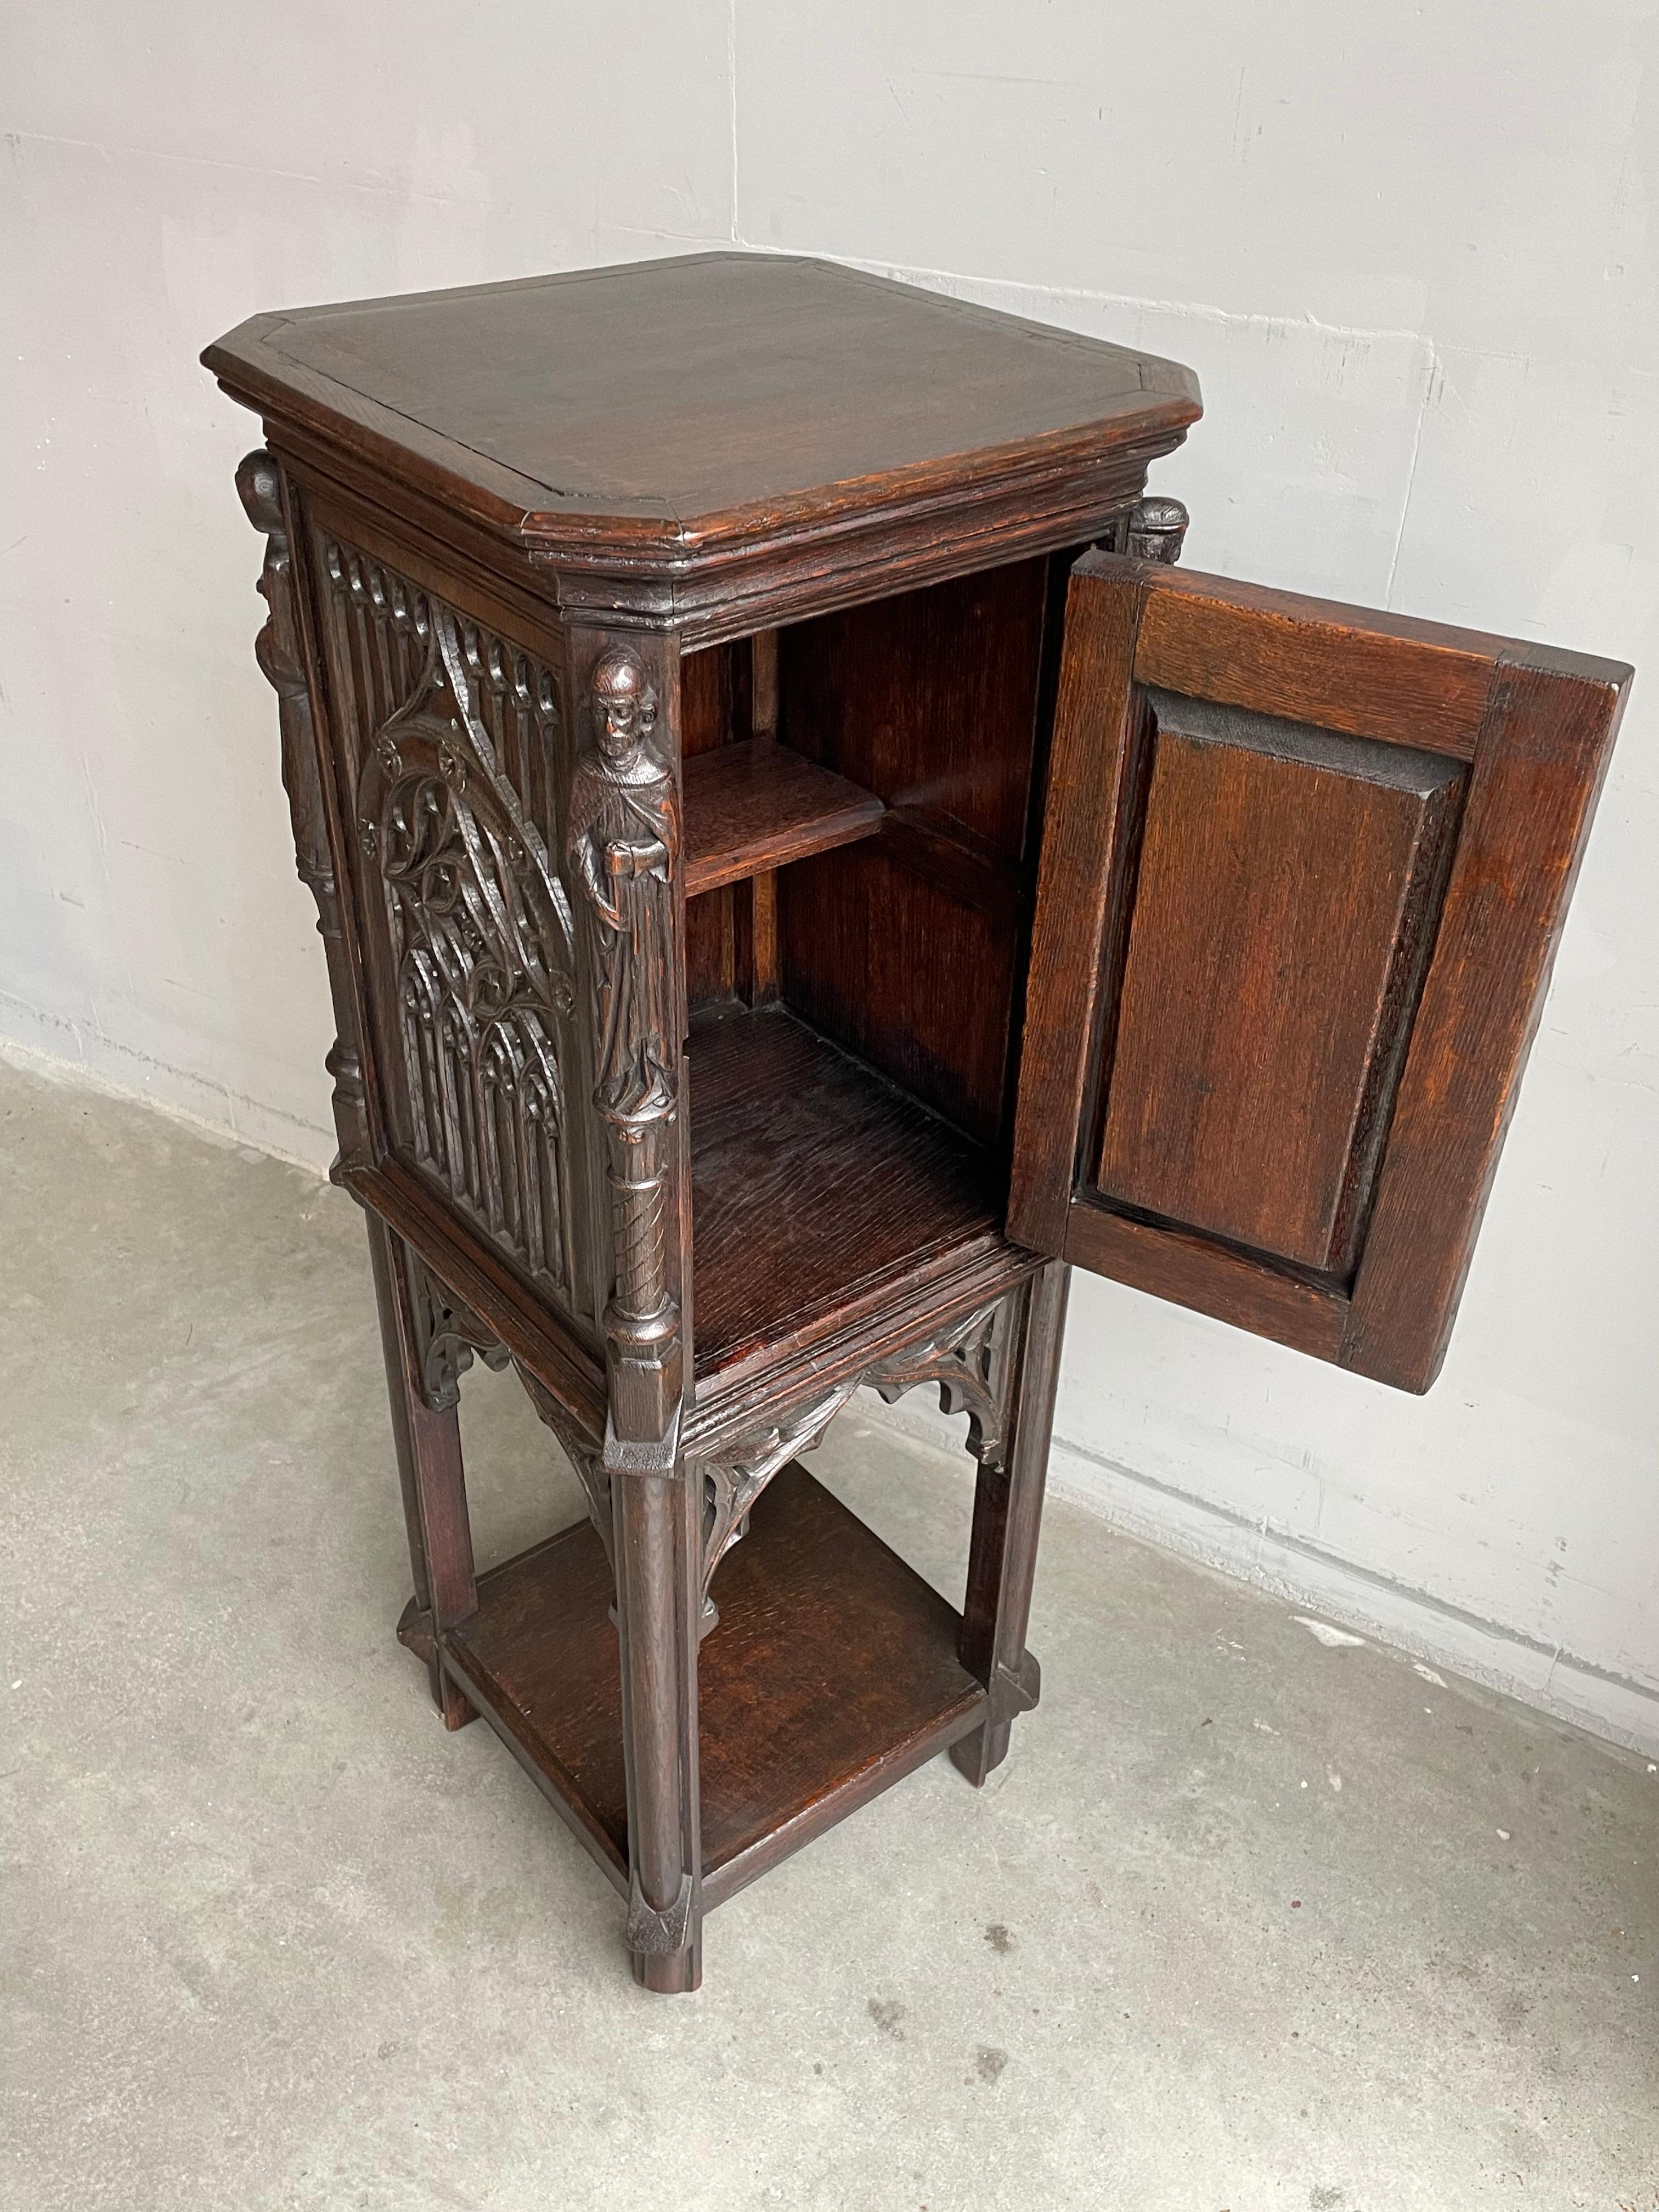 Gothic Revival Stunning Antique Gothic Style Dark Oak Cabinet w. Handcarved Medieval Sculptures For Sale